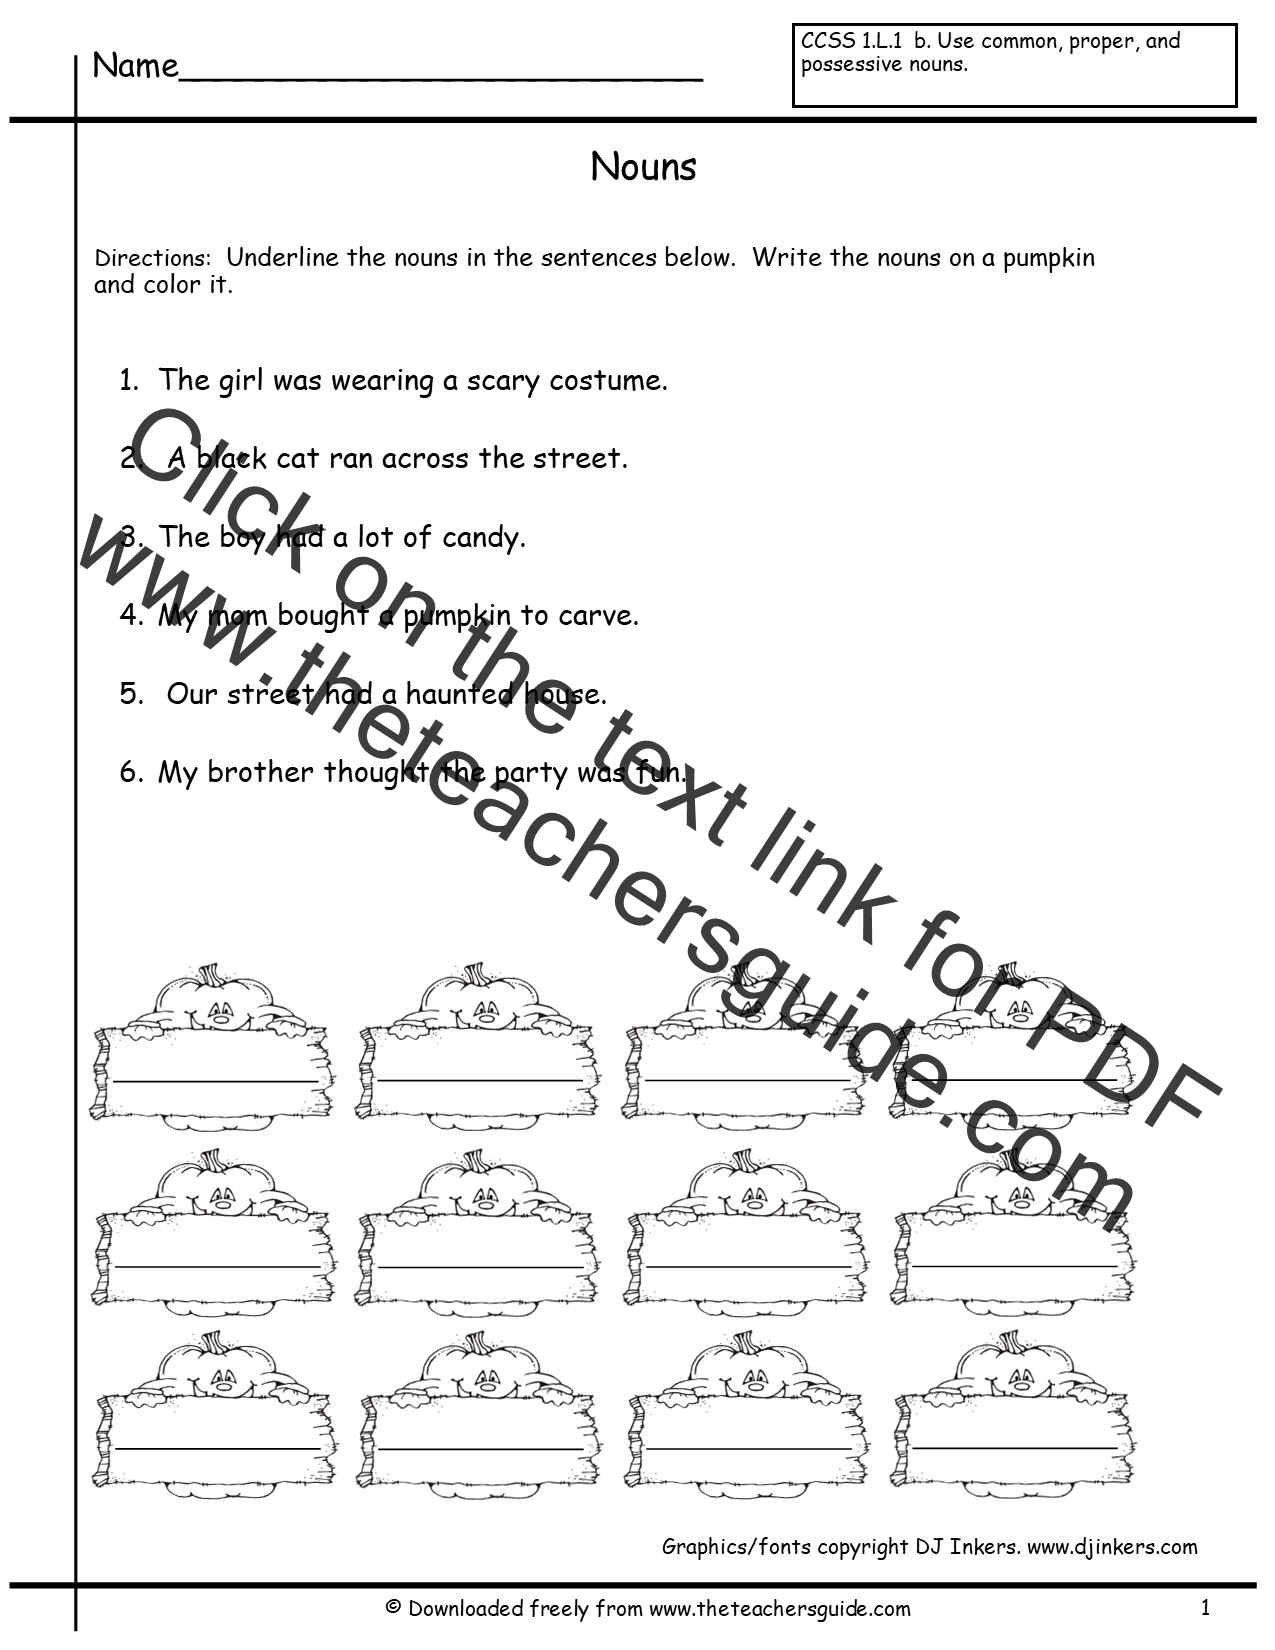 nouns-worksheets-from-the-teacher-s-guide